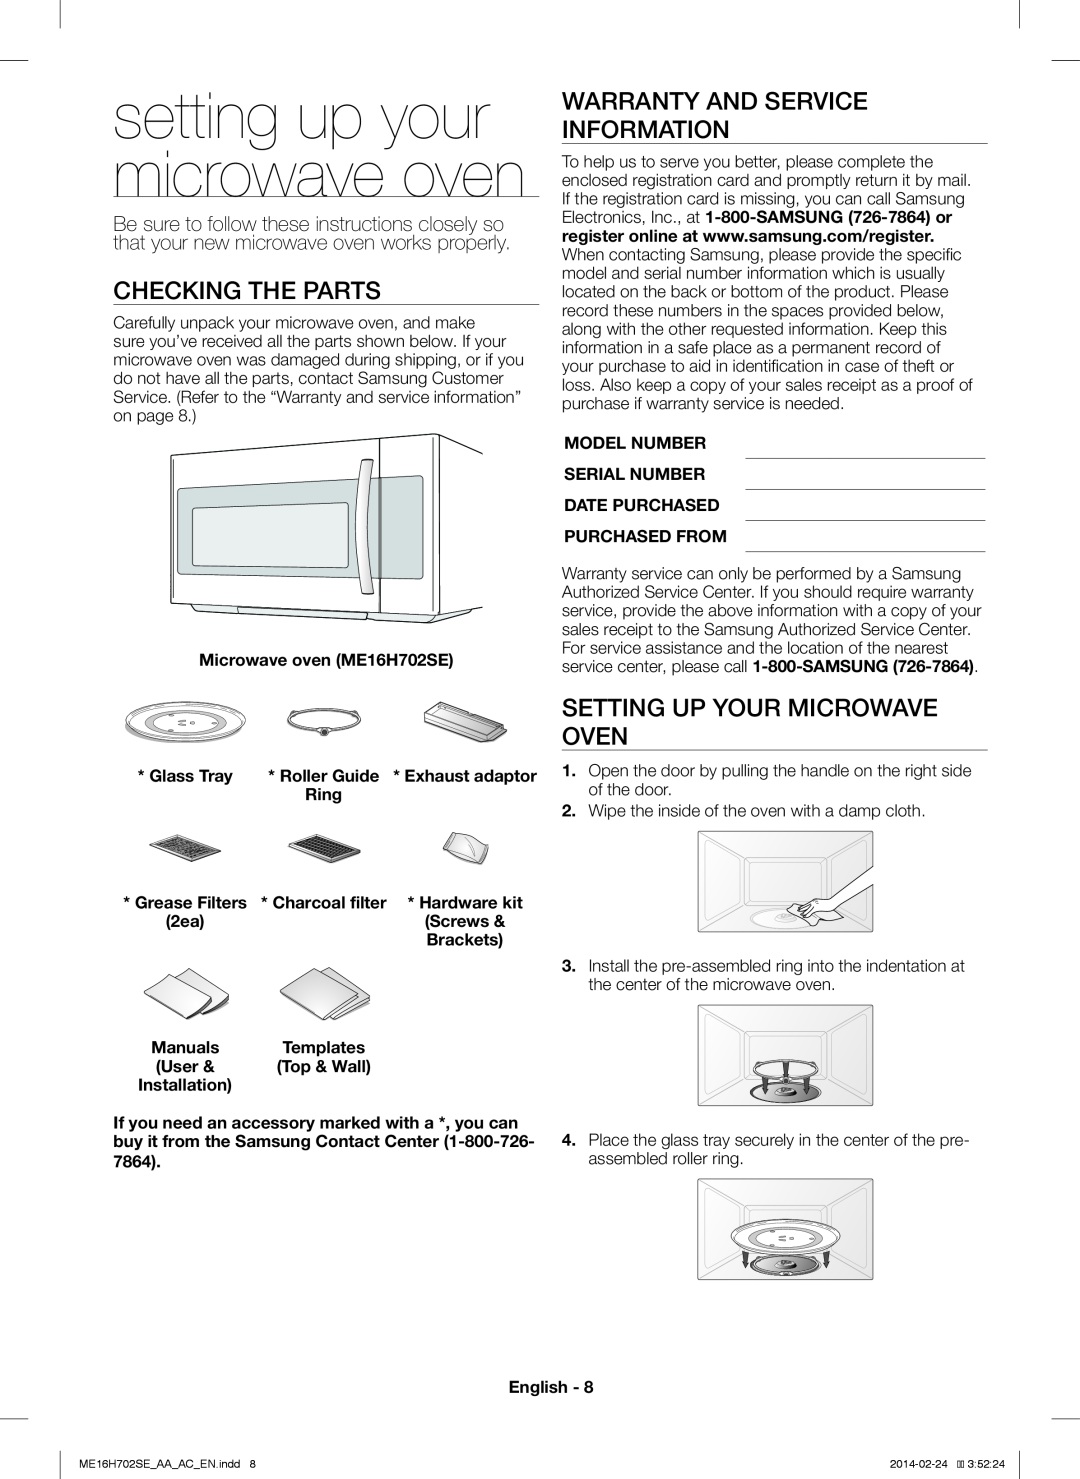 Samsung ME16H702SE setting up your microwave oven, Checking The Parts, Warranty And Service Information, Purchased From 